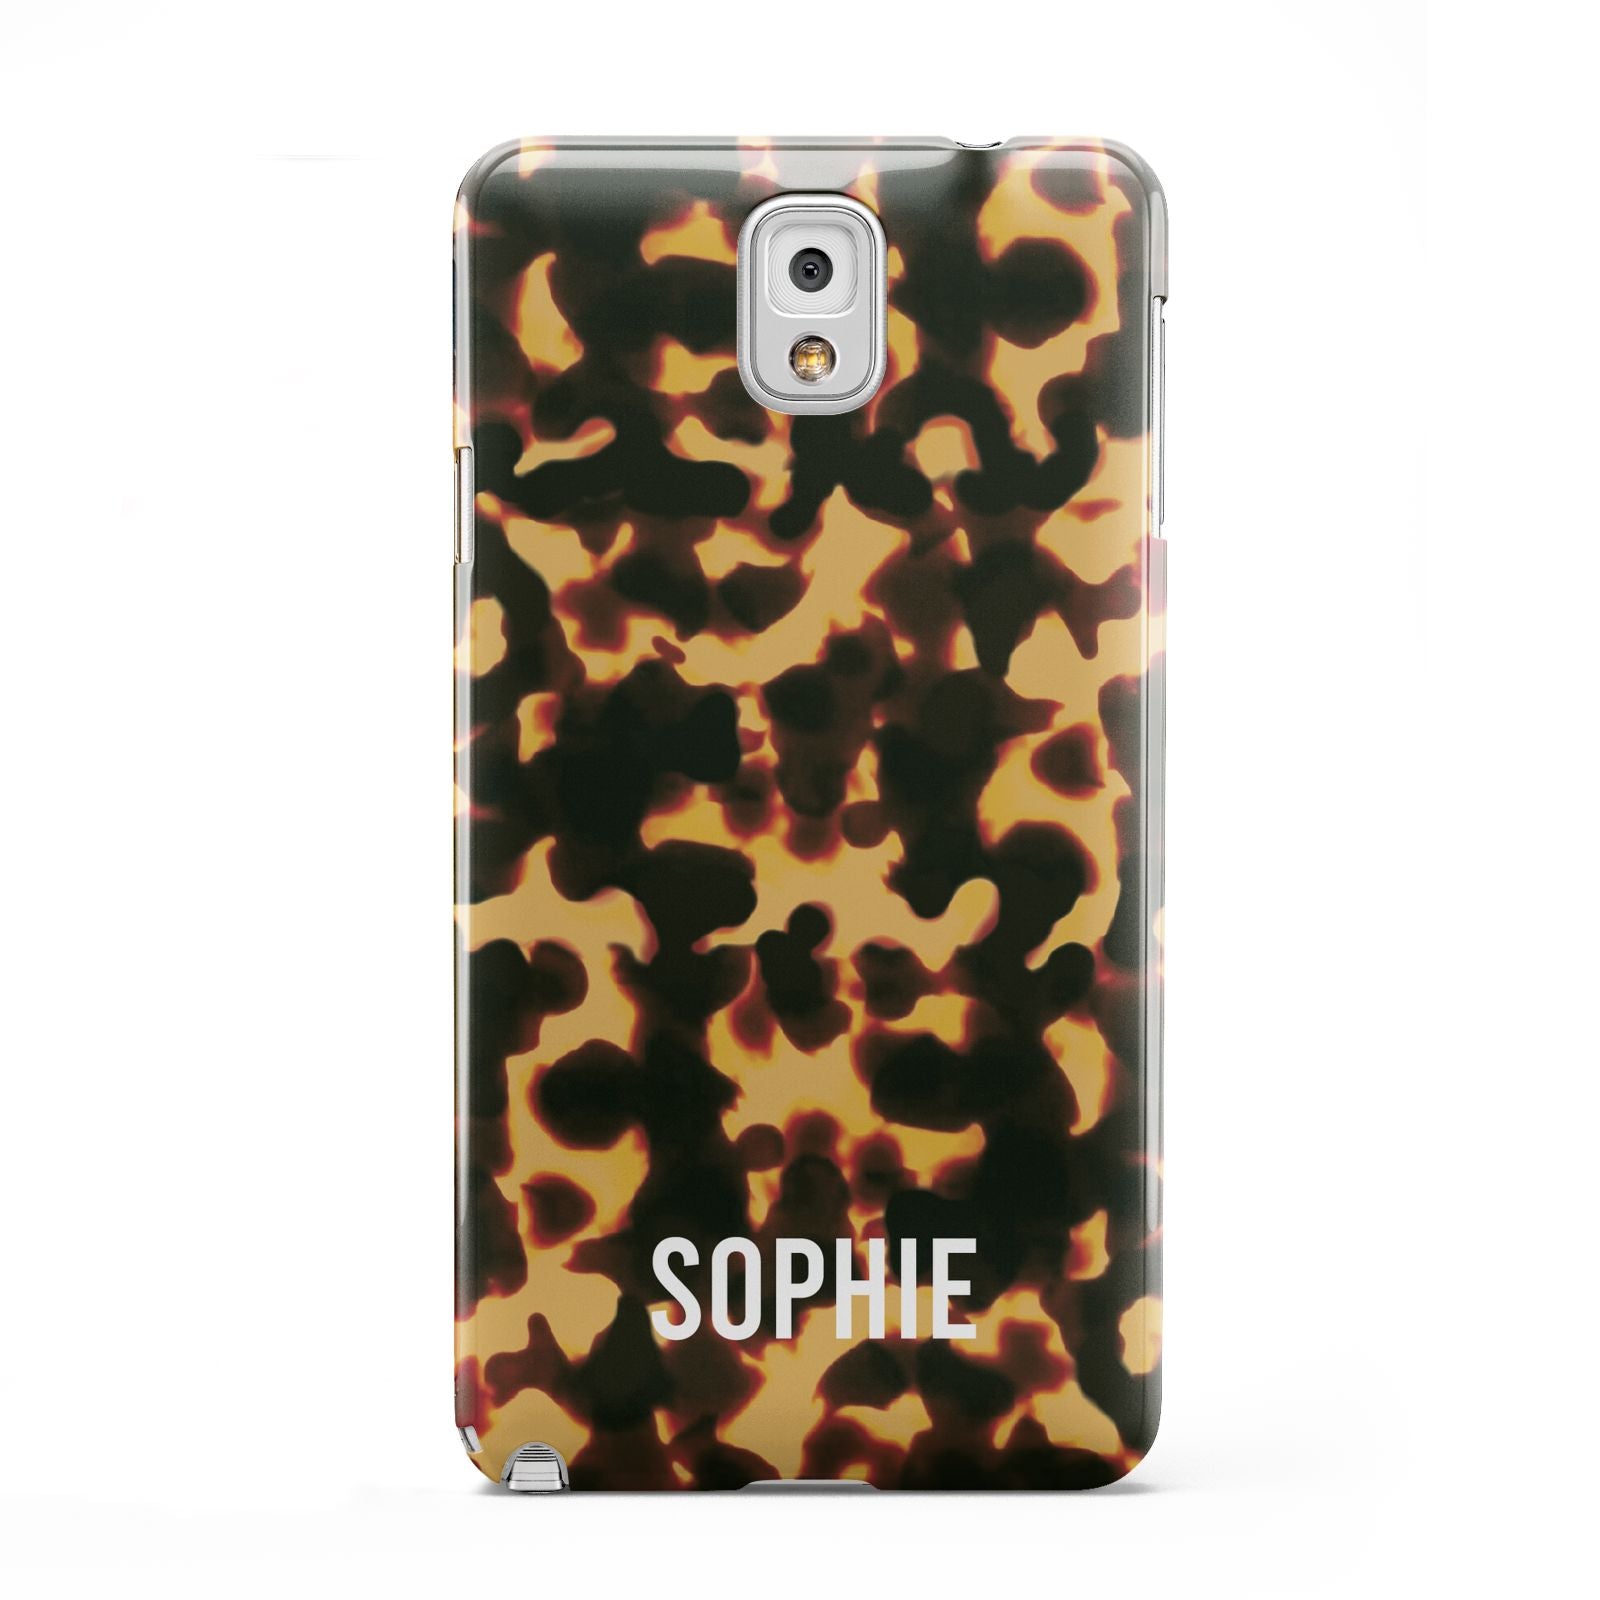 Personalised Tortoise Shell Pattern Samsung Galaxy Note 3 Case